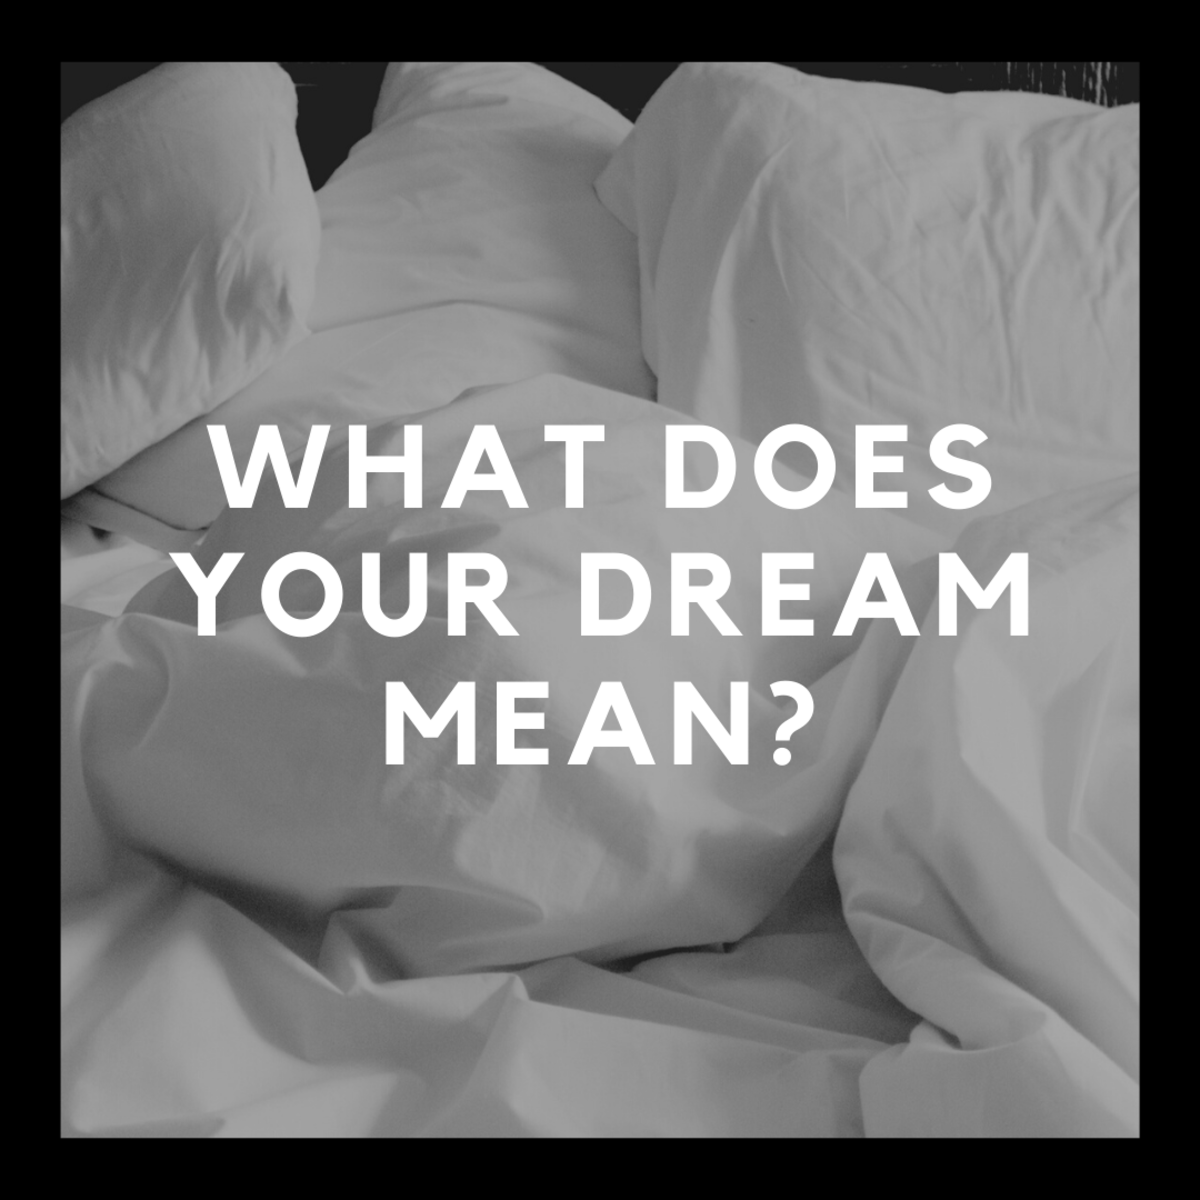 Learn what that weird dream you keep having means!